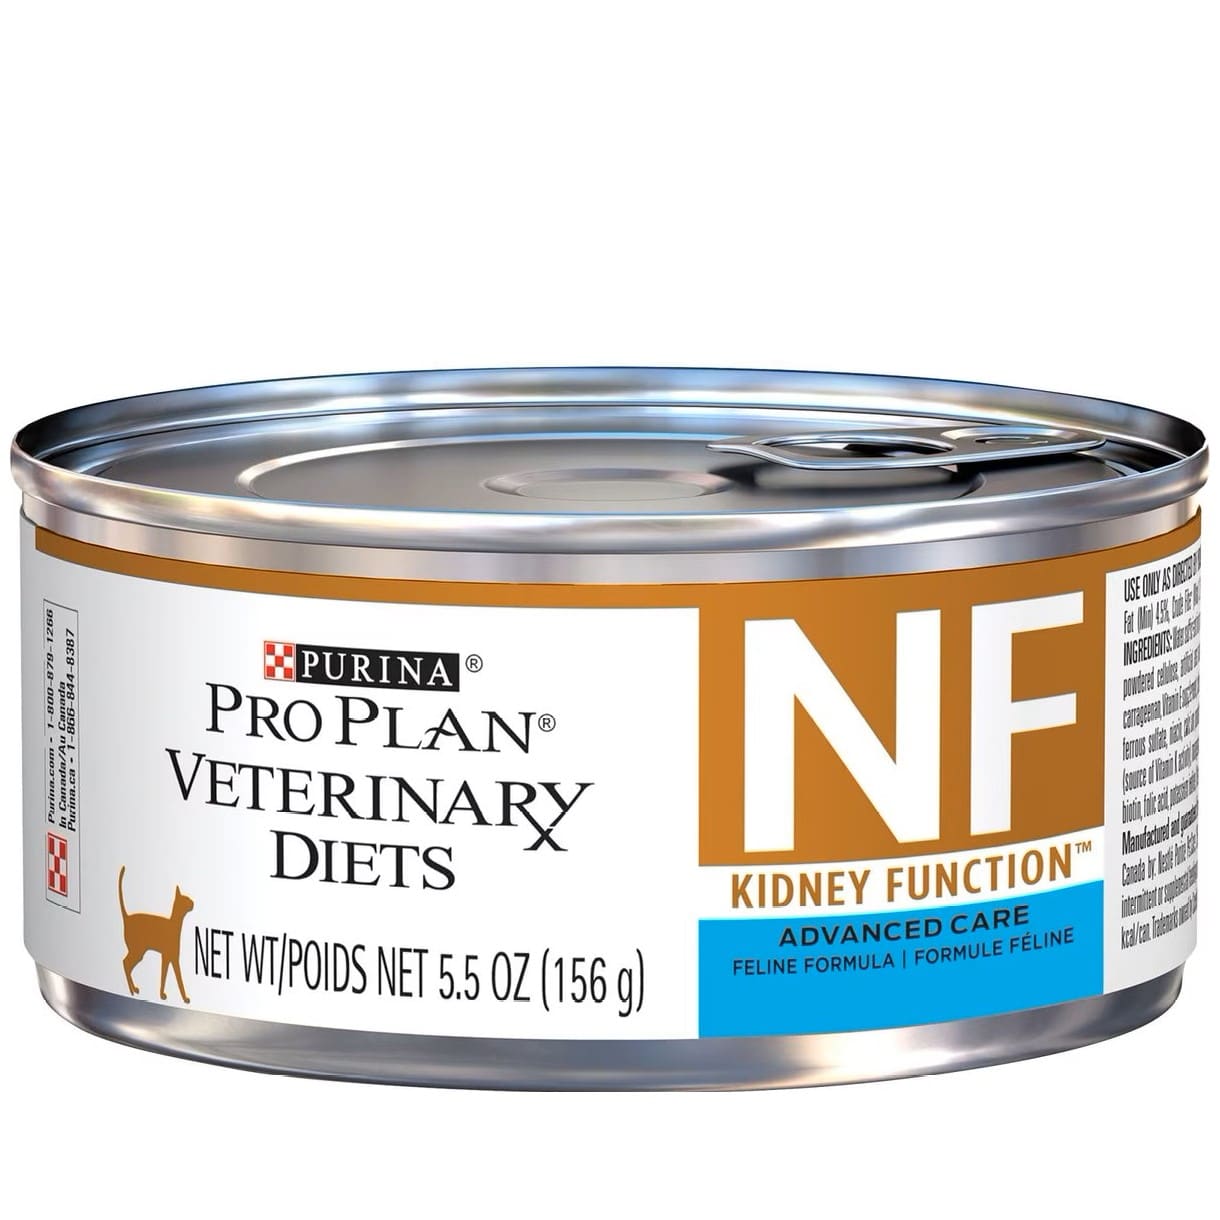 Purina Pro Plan Veterinary Diets NF Kidney Function Advanced Care Wet Cat Food